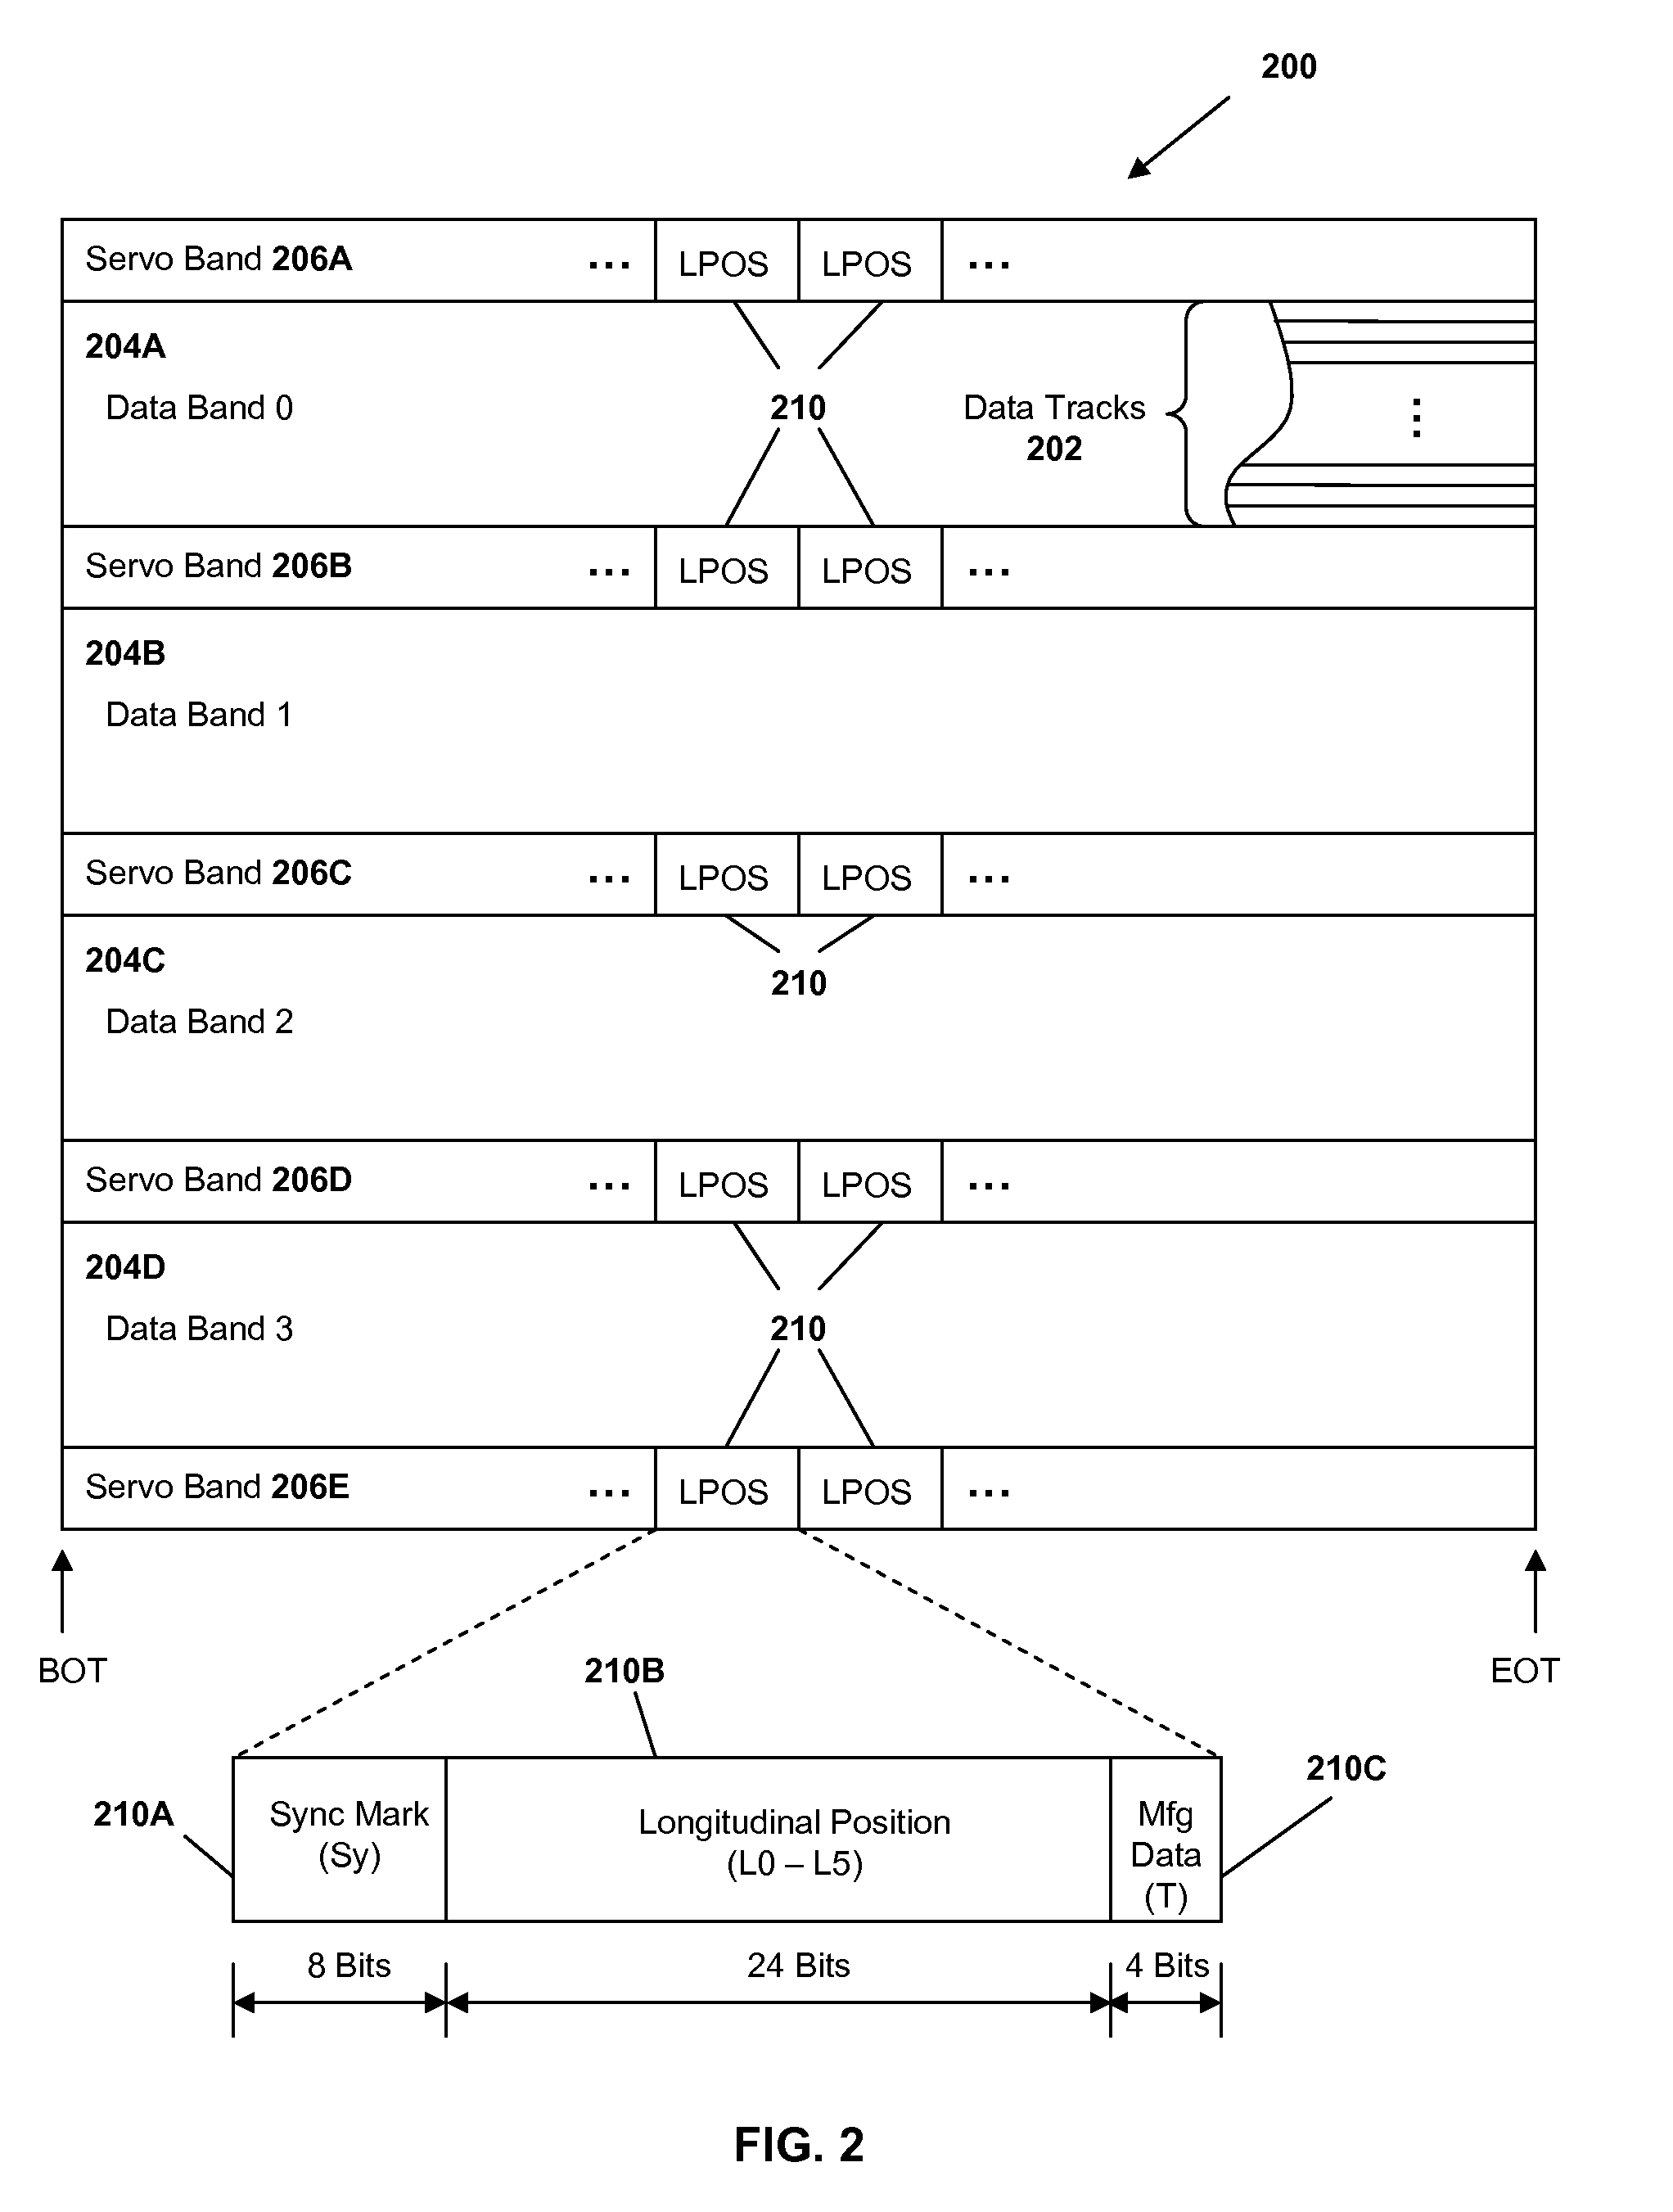 Error correction capability for longitudinal position data in a tape storage system